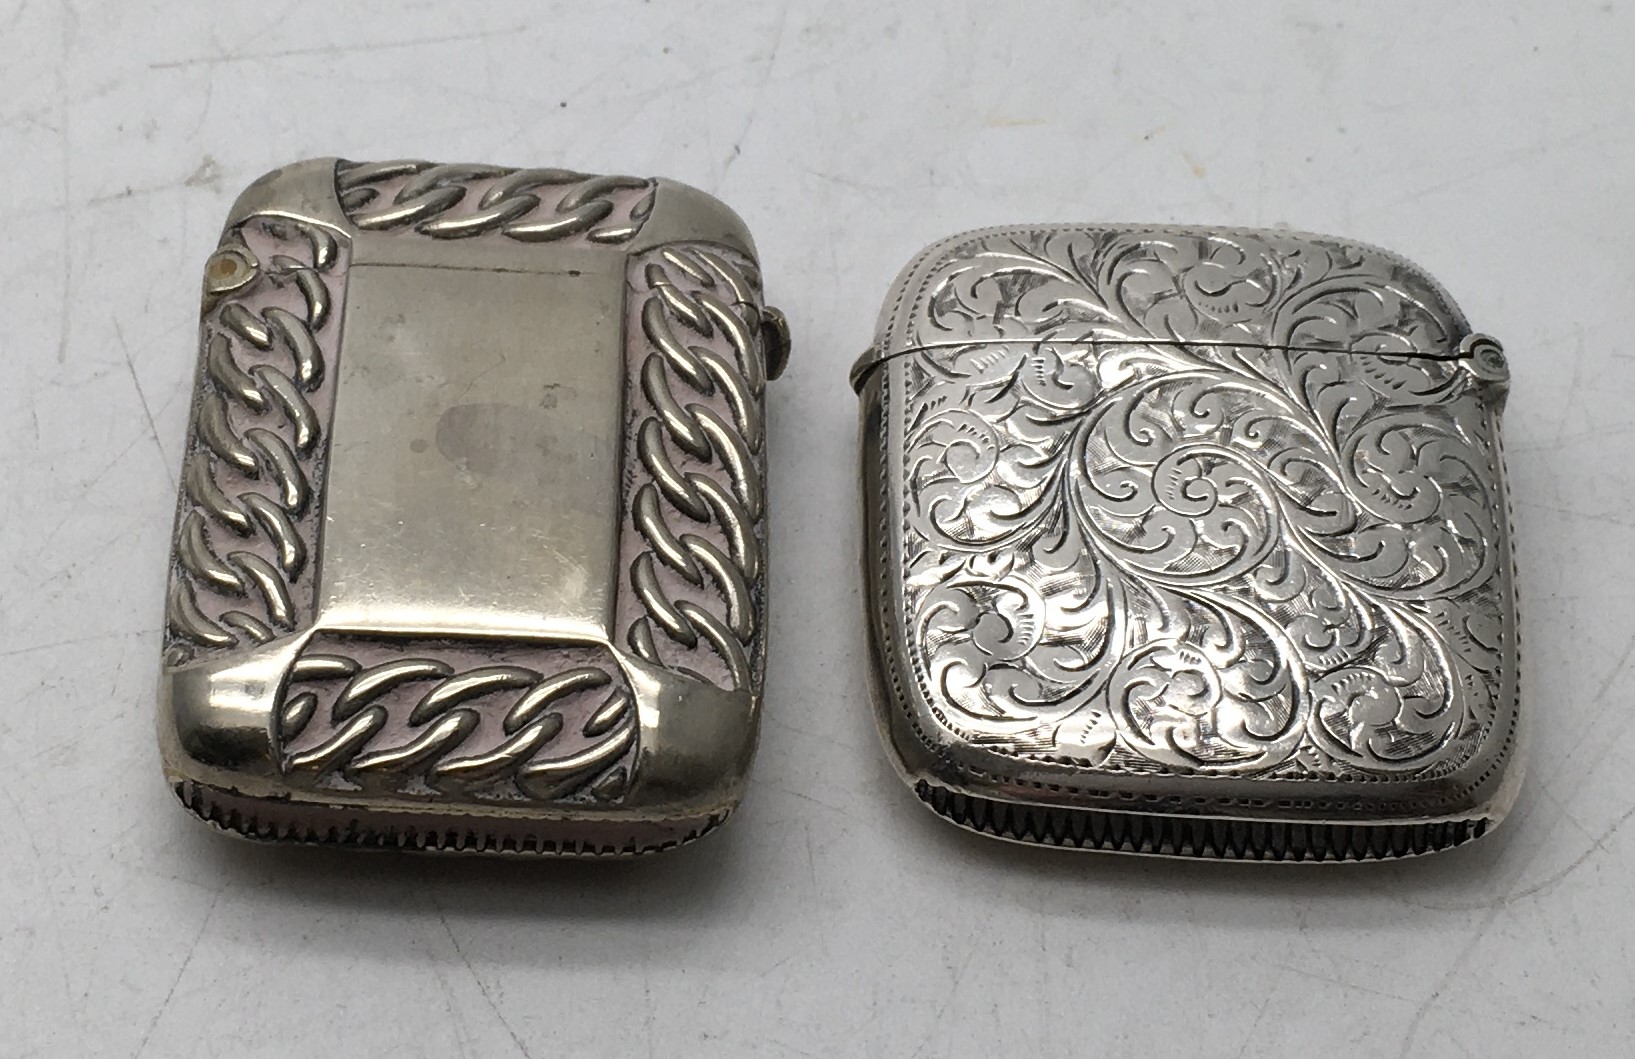 Victorian Silver Vesta with engraved decoration, 20 grams and 1 other Victorian silver plated Vesta - Image 2 of 3